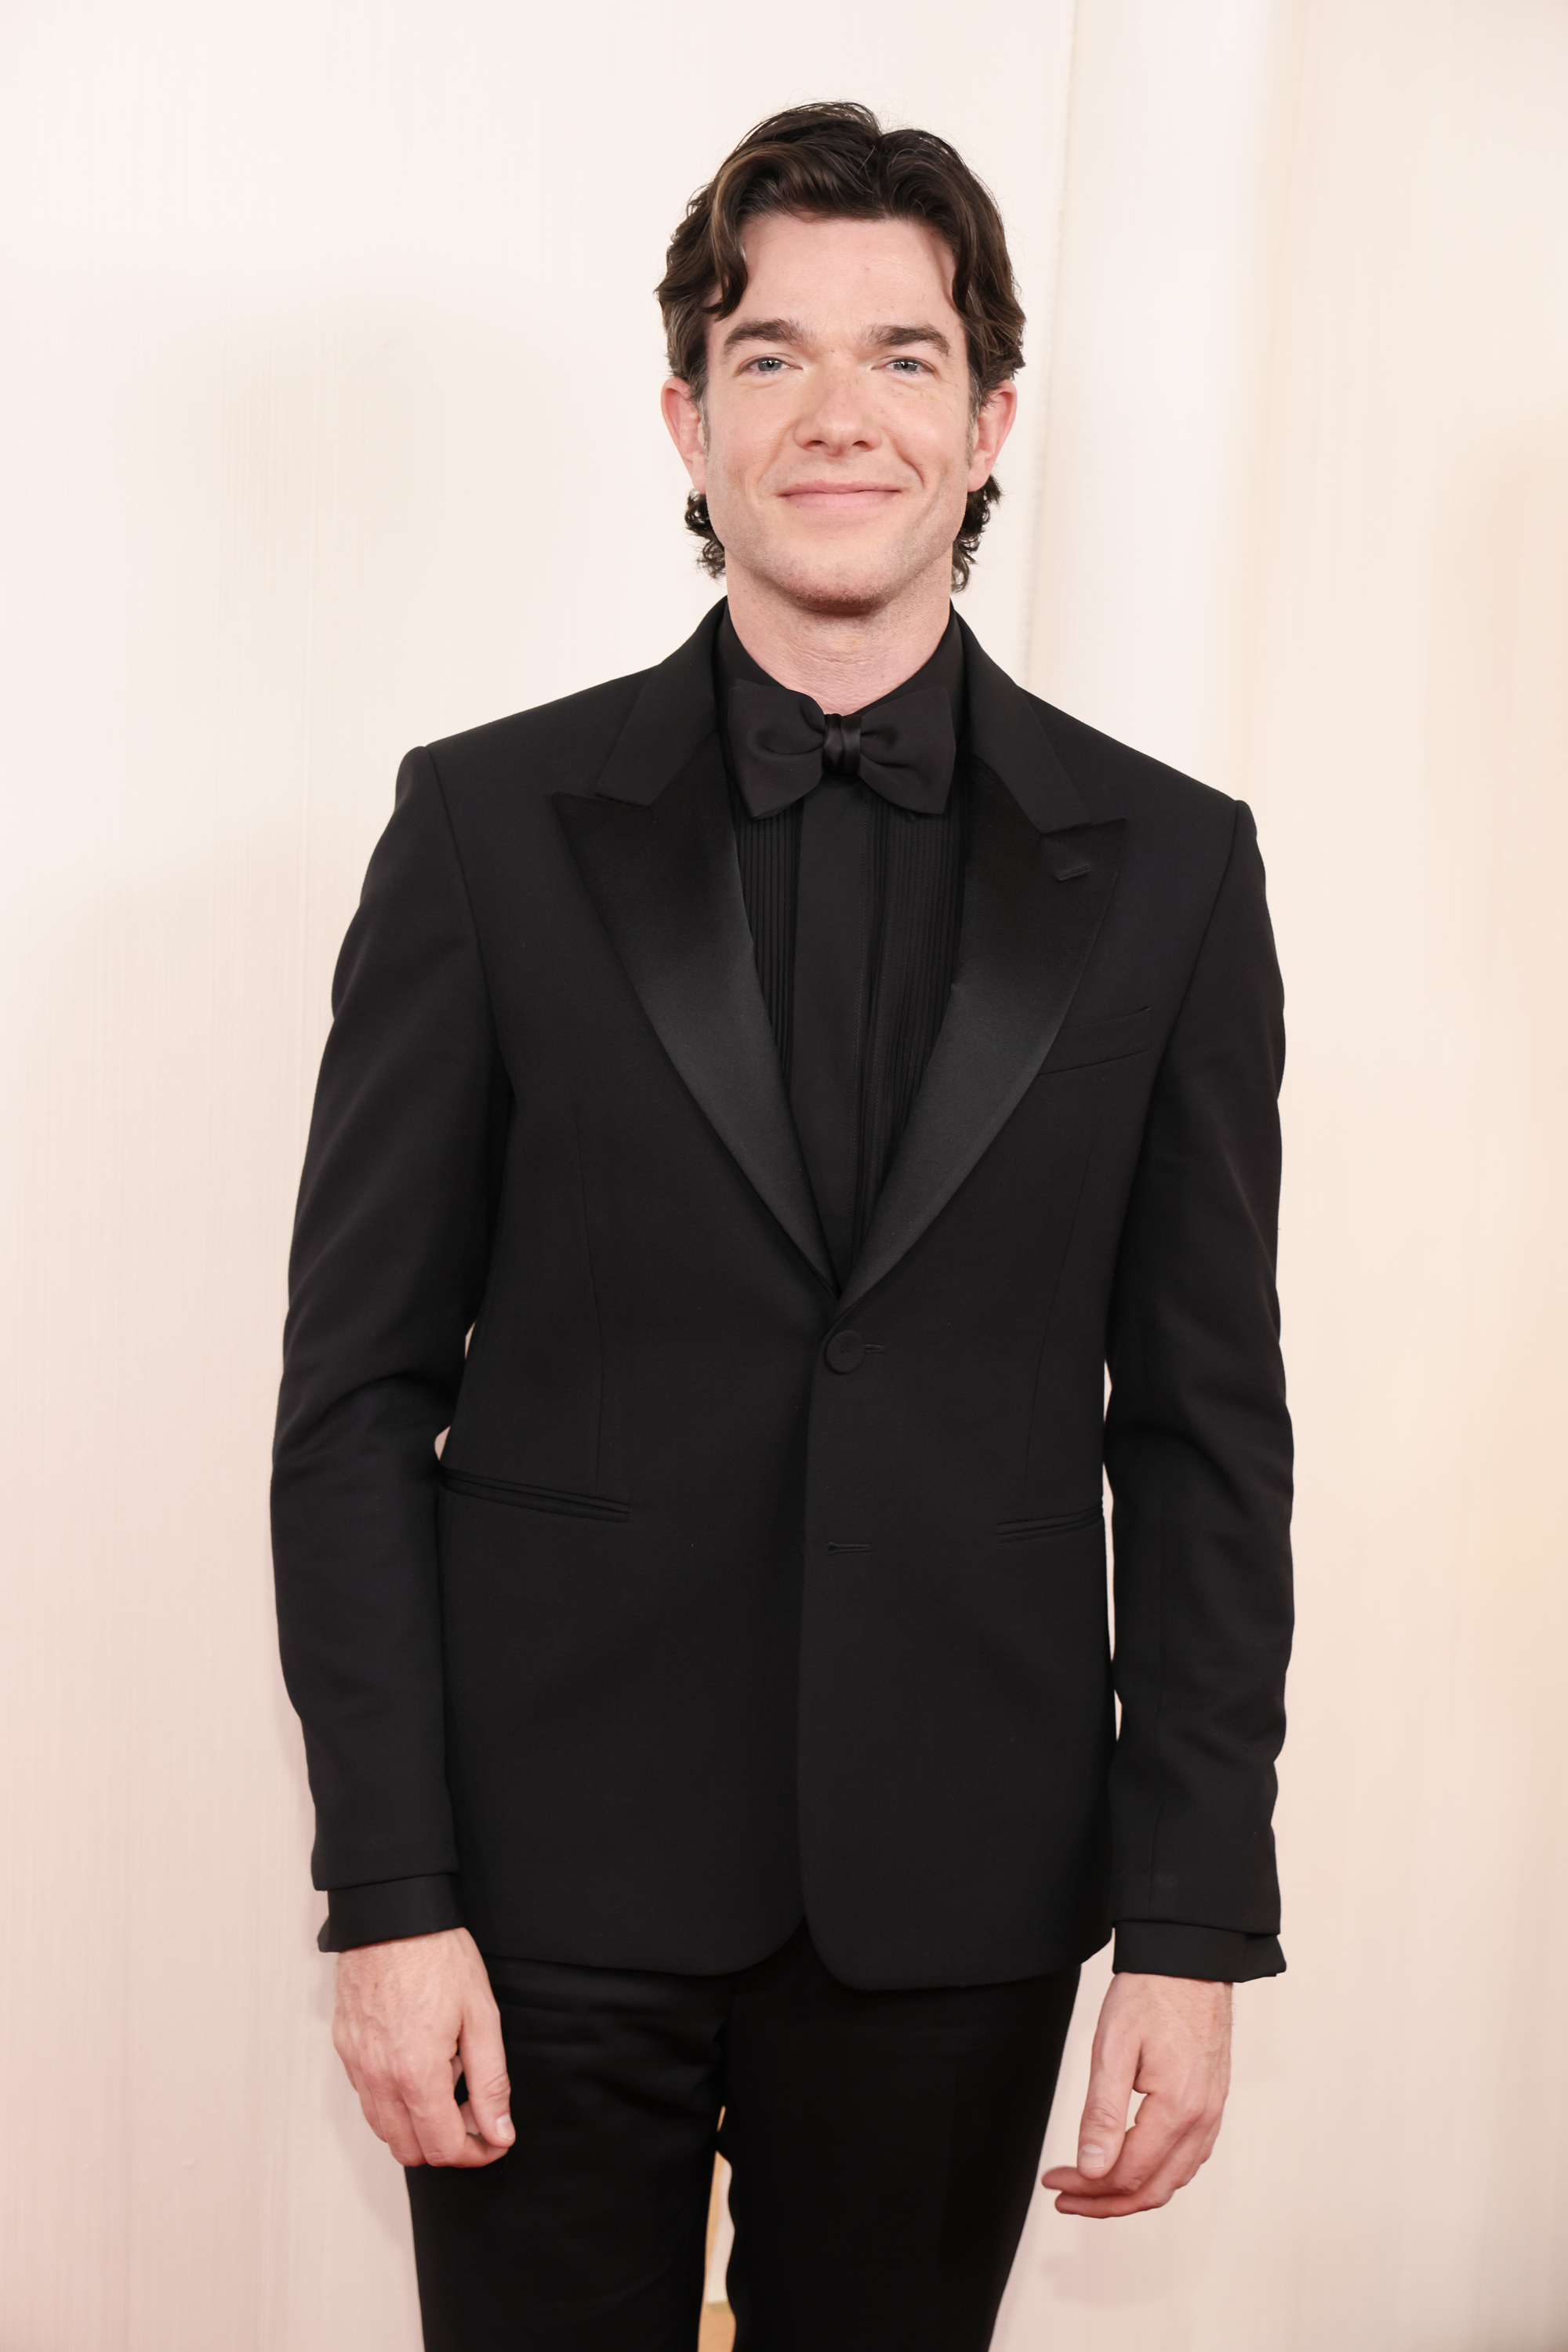 Man in a classic black tuxedo with bow tie standing on a red carpet